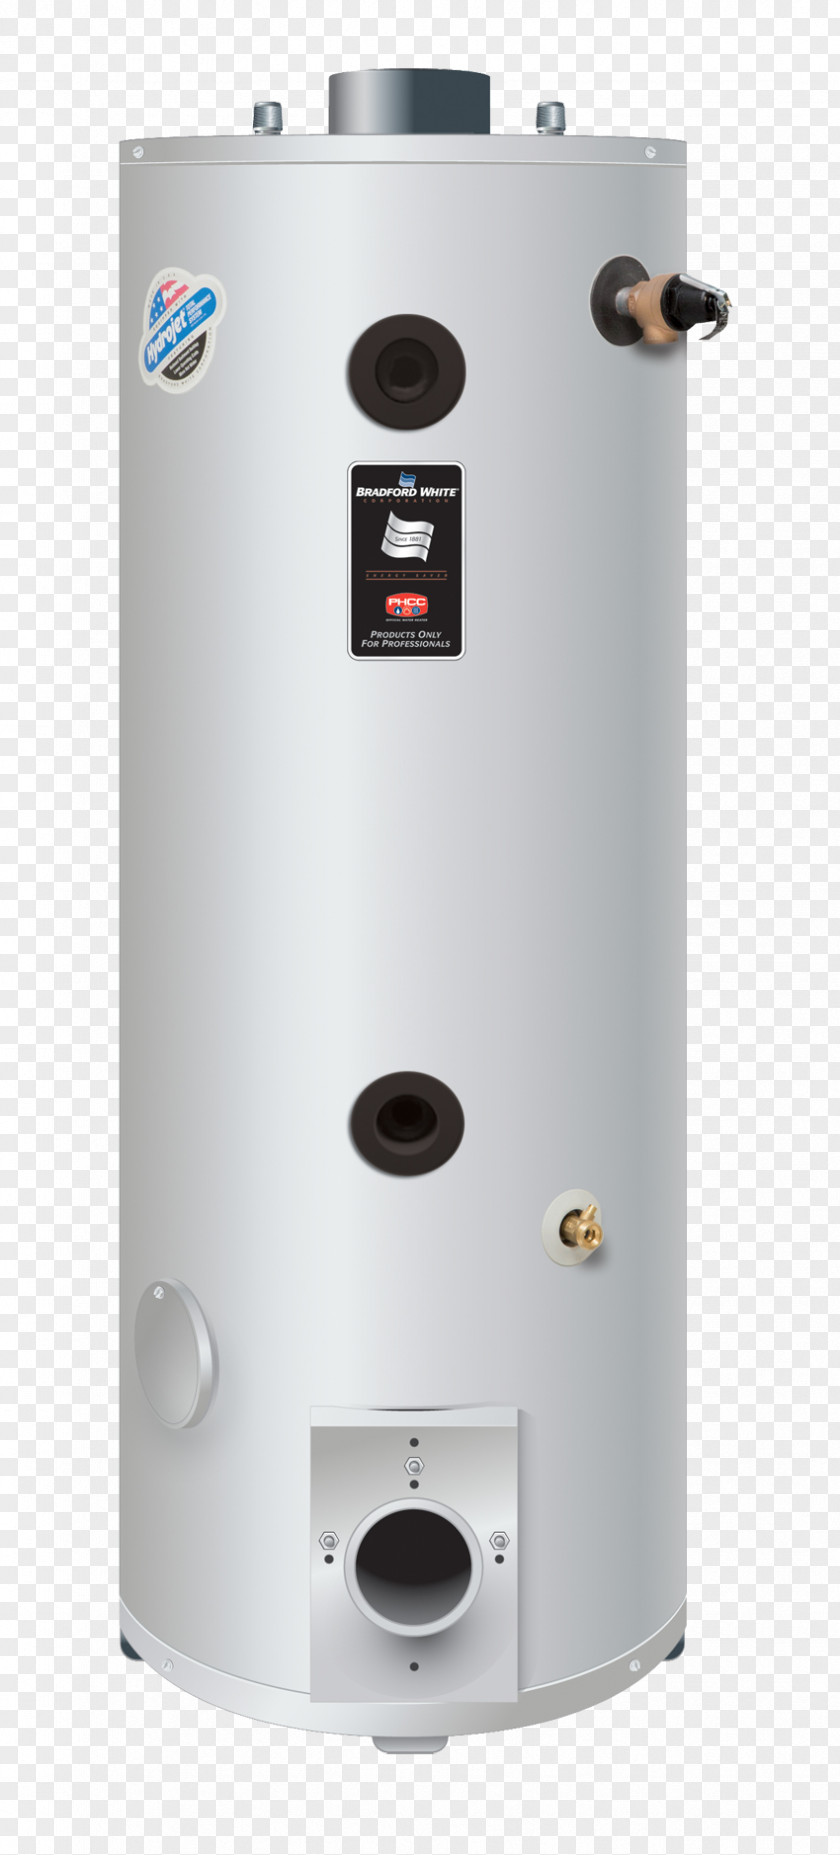 Bradford White Water Heating Hot Storage Tank Electricity Electric PNG